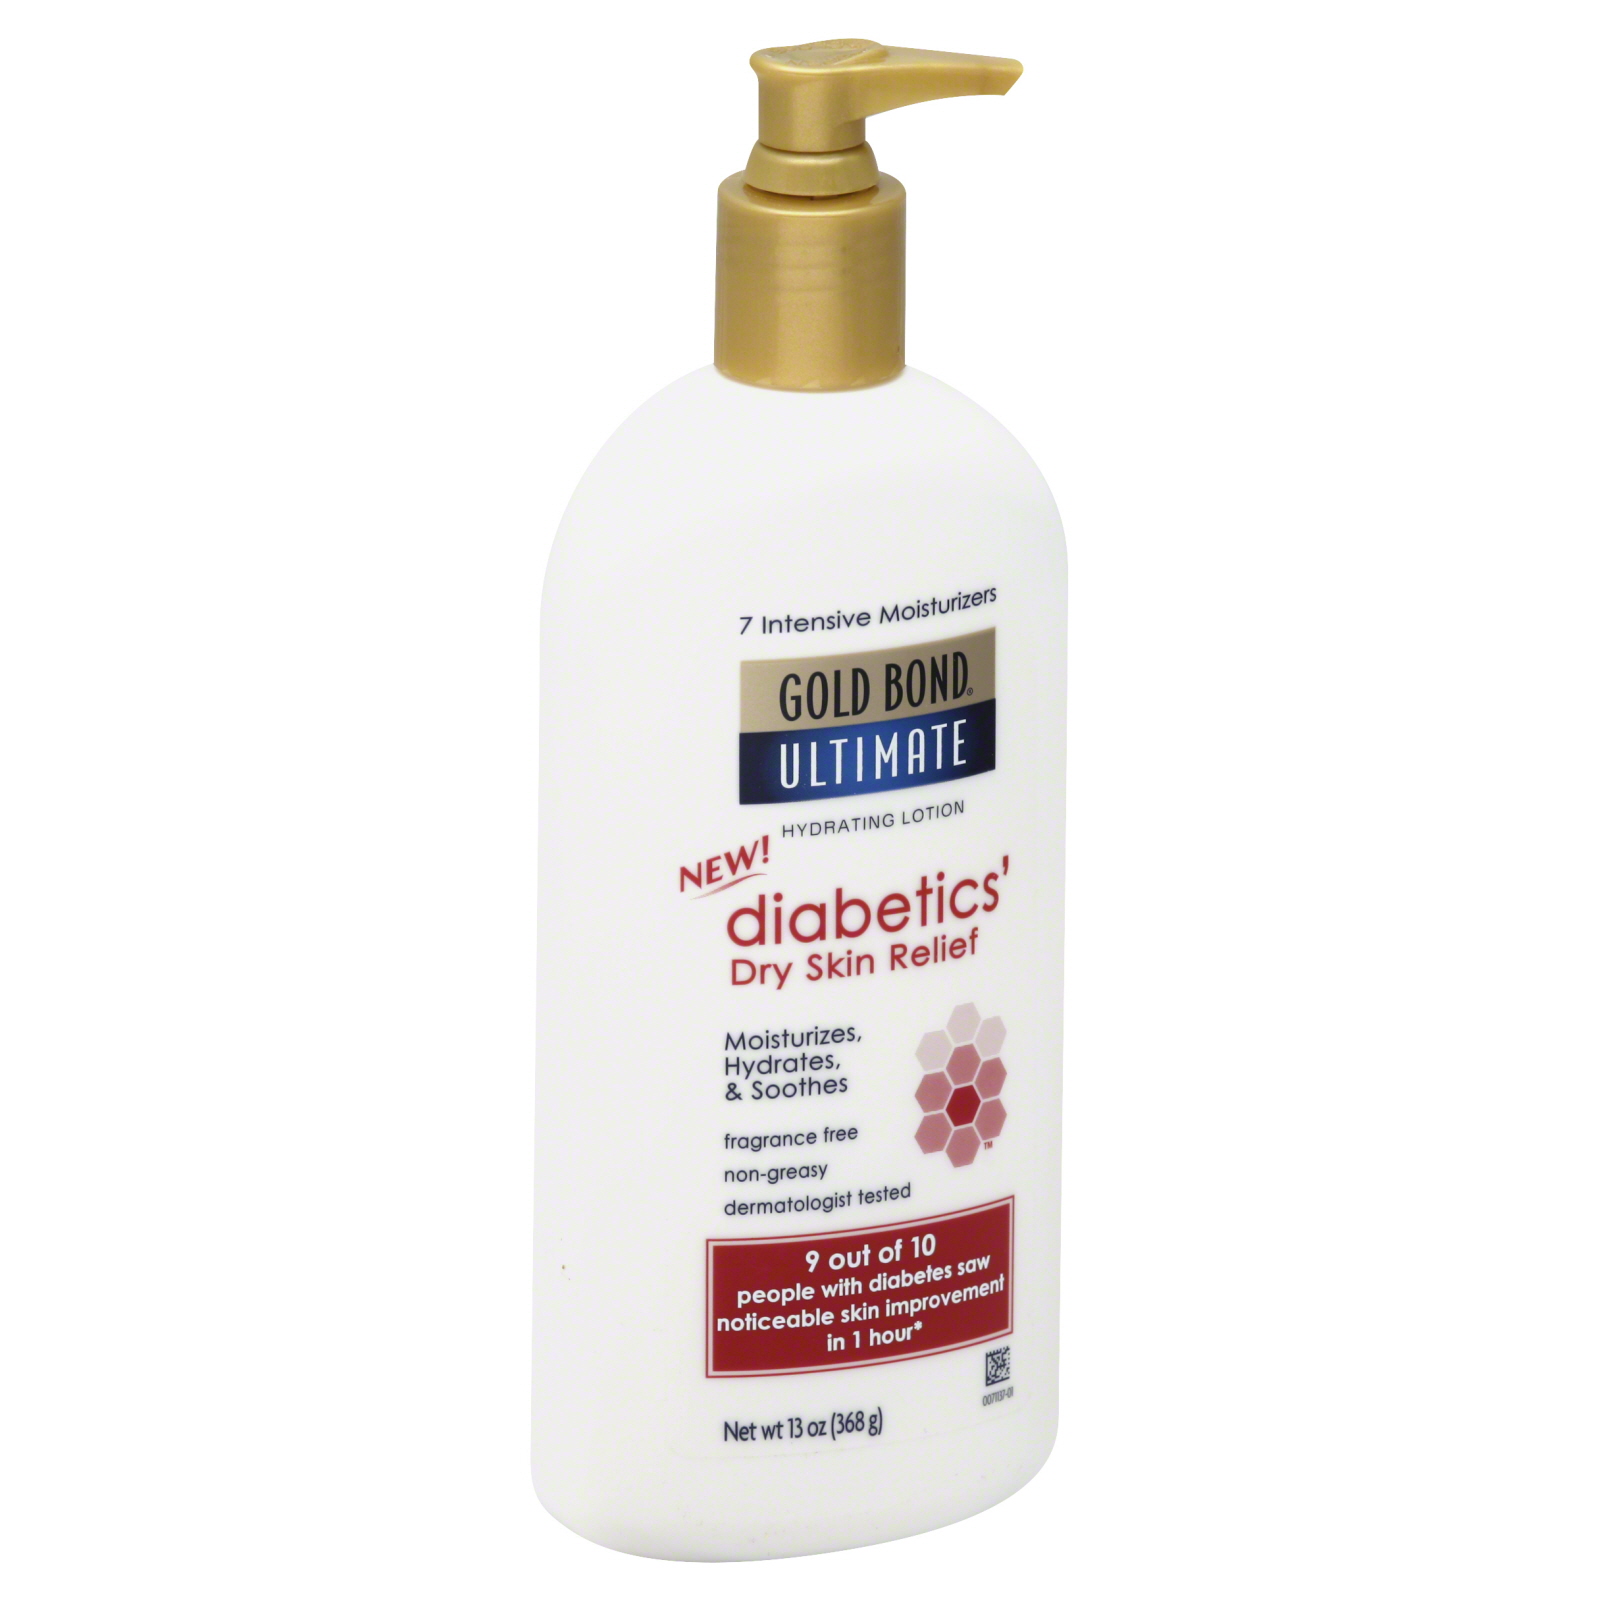 Gold Bond Ultimate Hydrating Lotion Diabetic Skin Relief Lotion, 13 oz